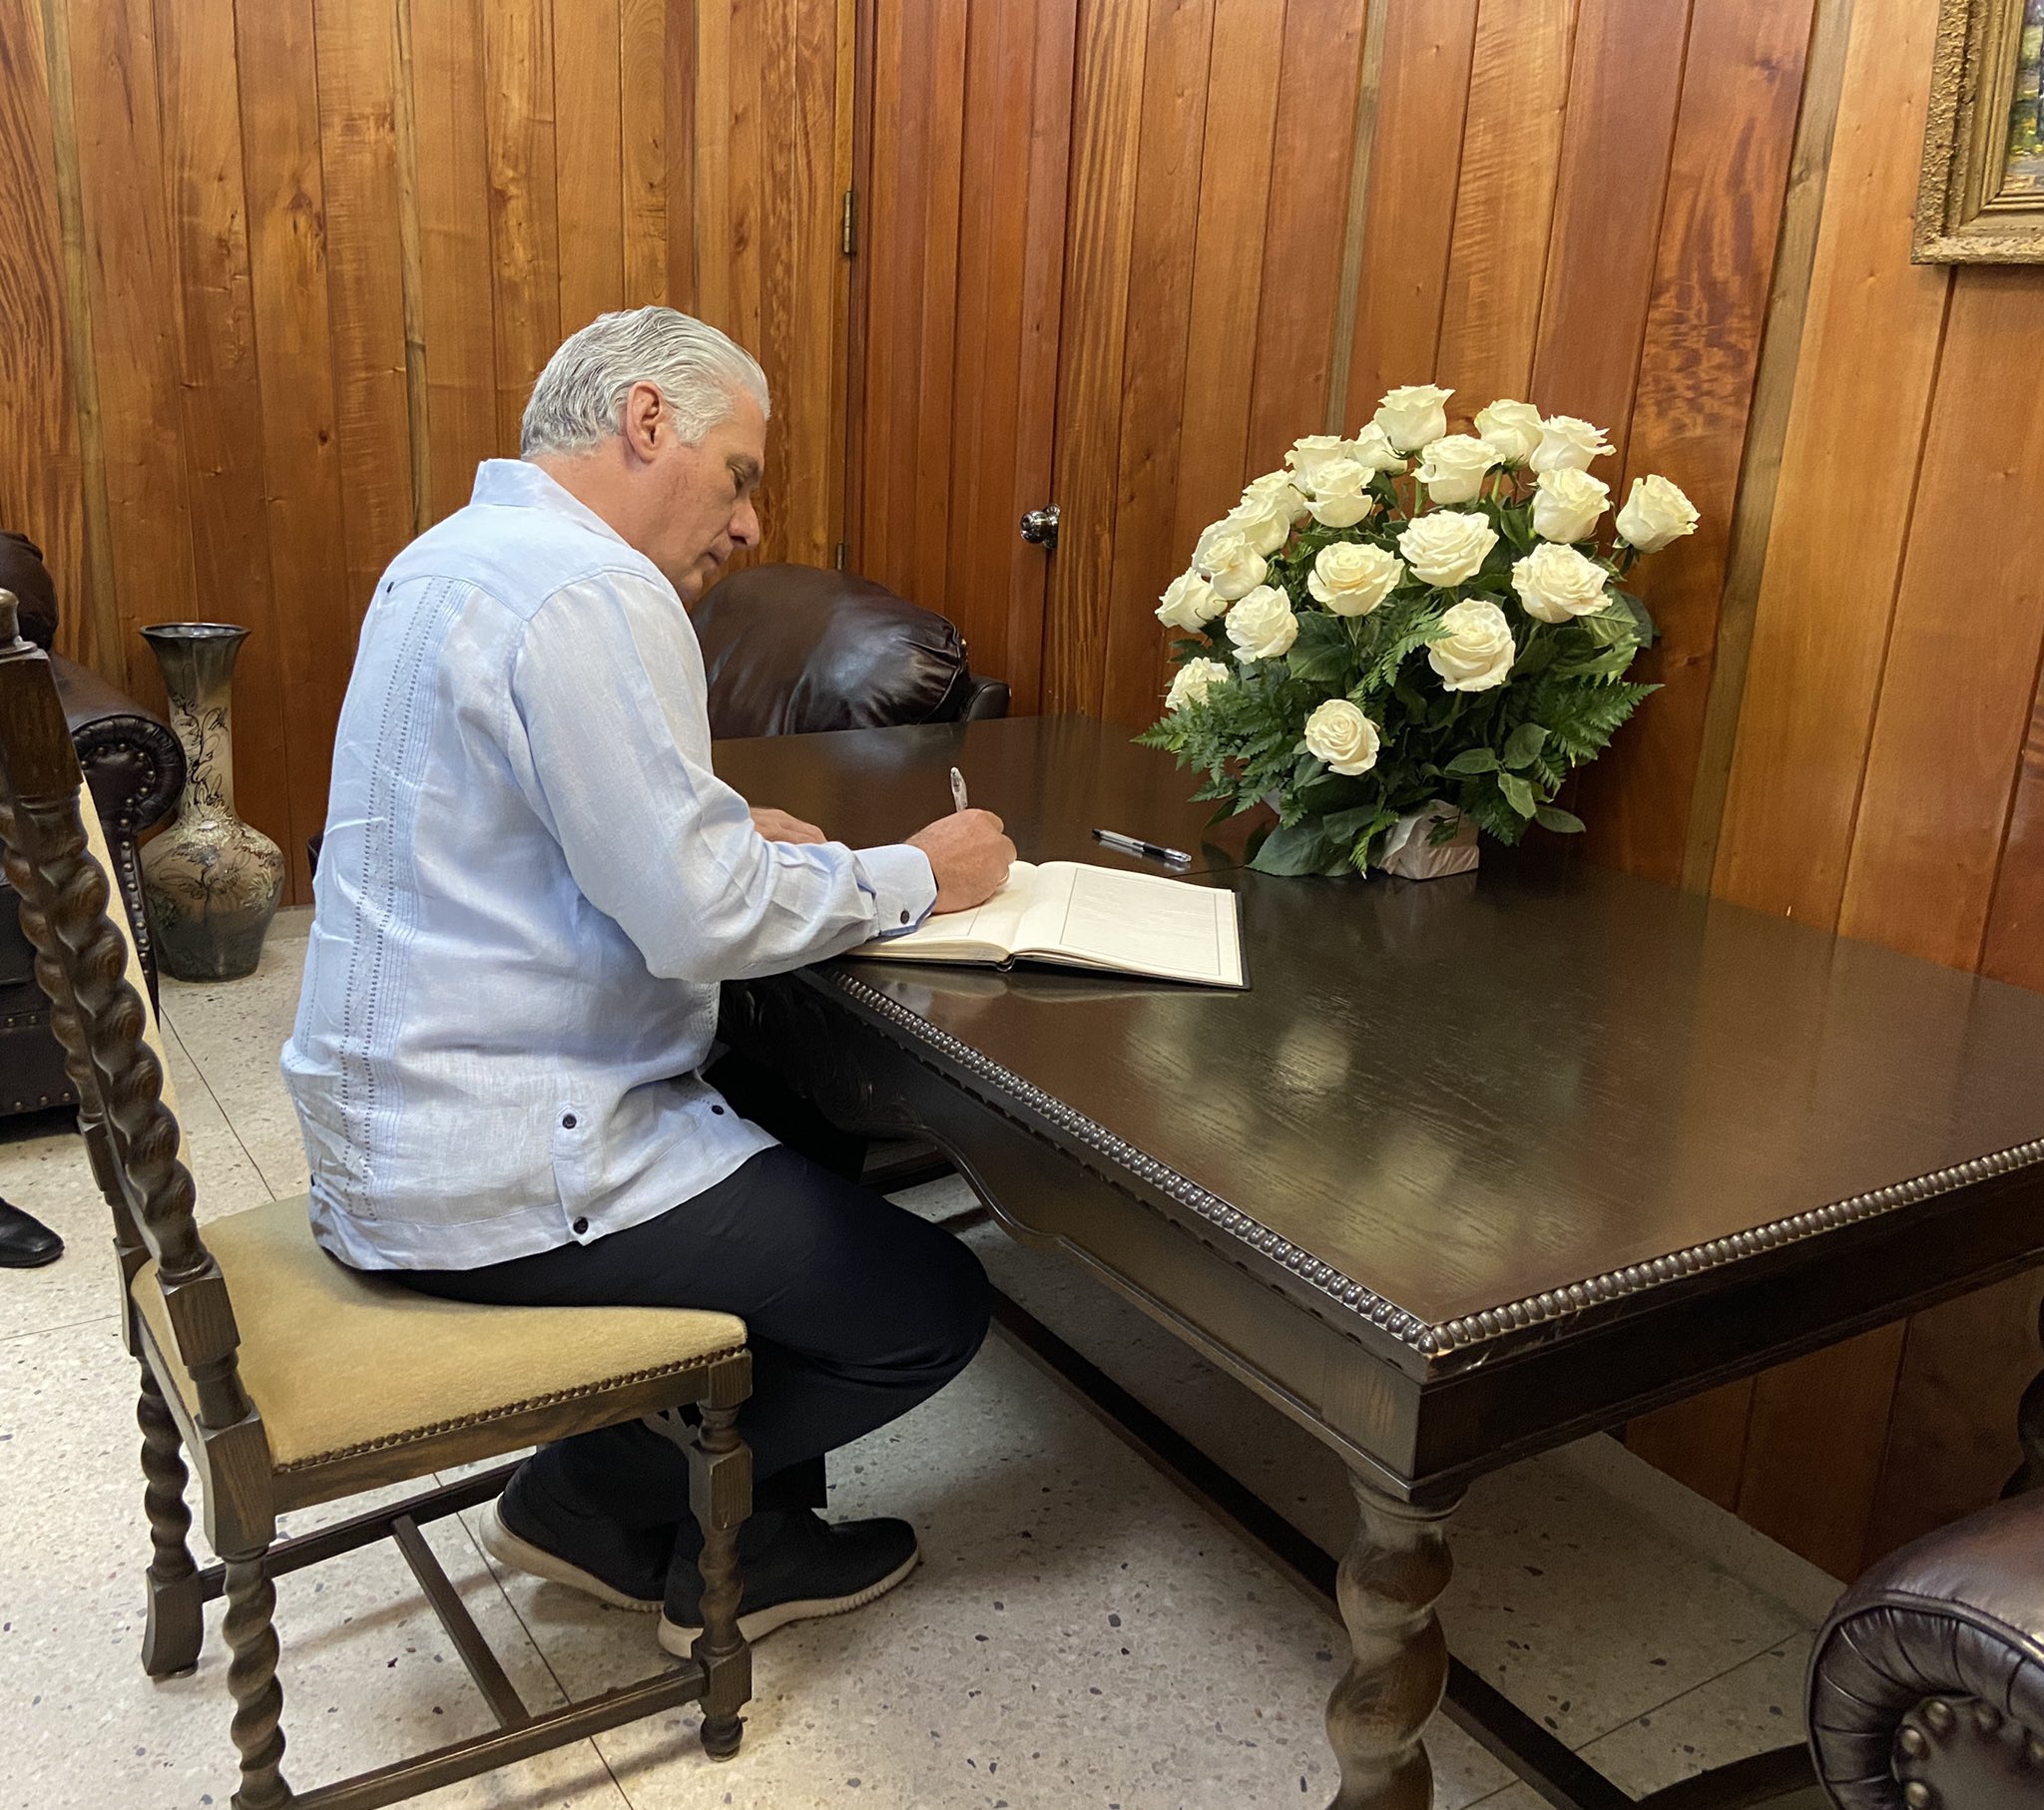 The Cuban President signs a book of condolences for the attack that occurred in Russia